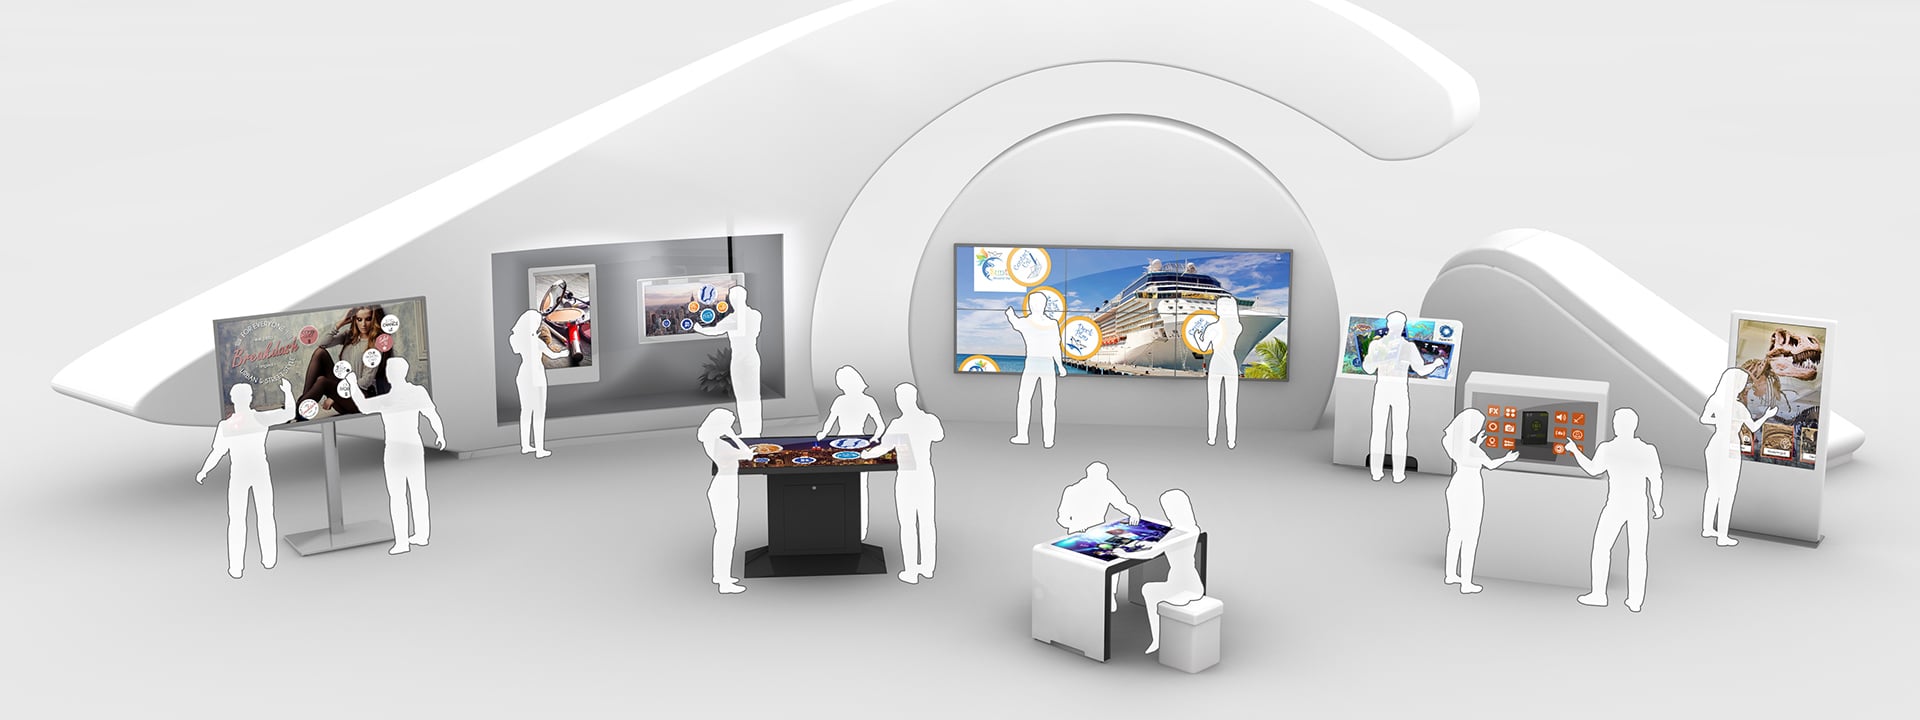 Multi touch screen software for Museum & Science Center